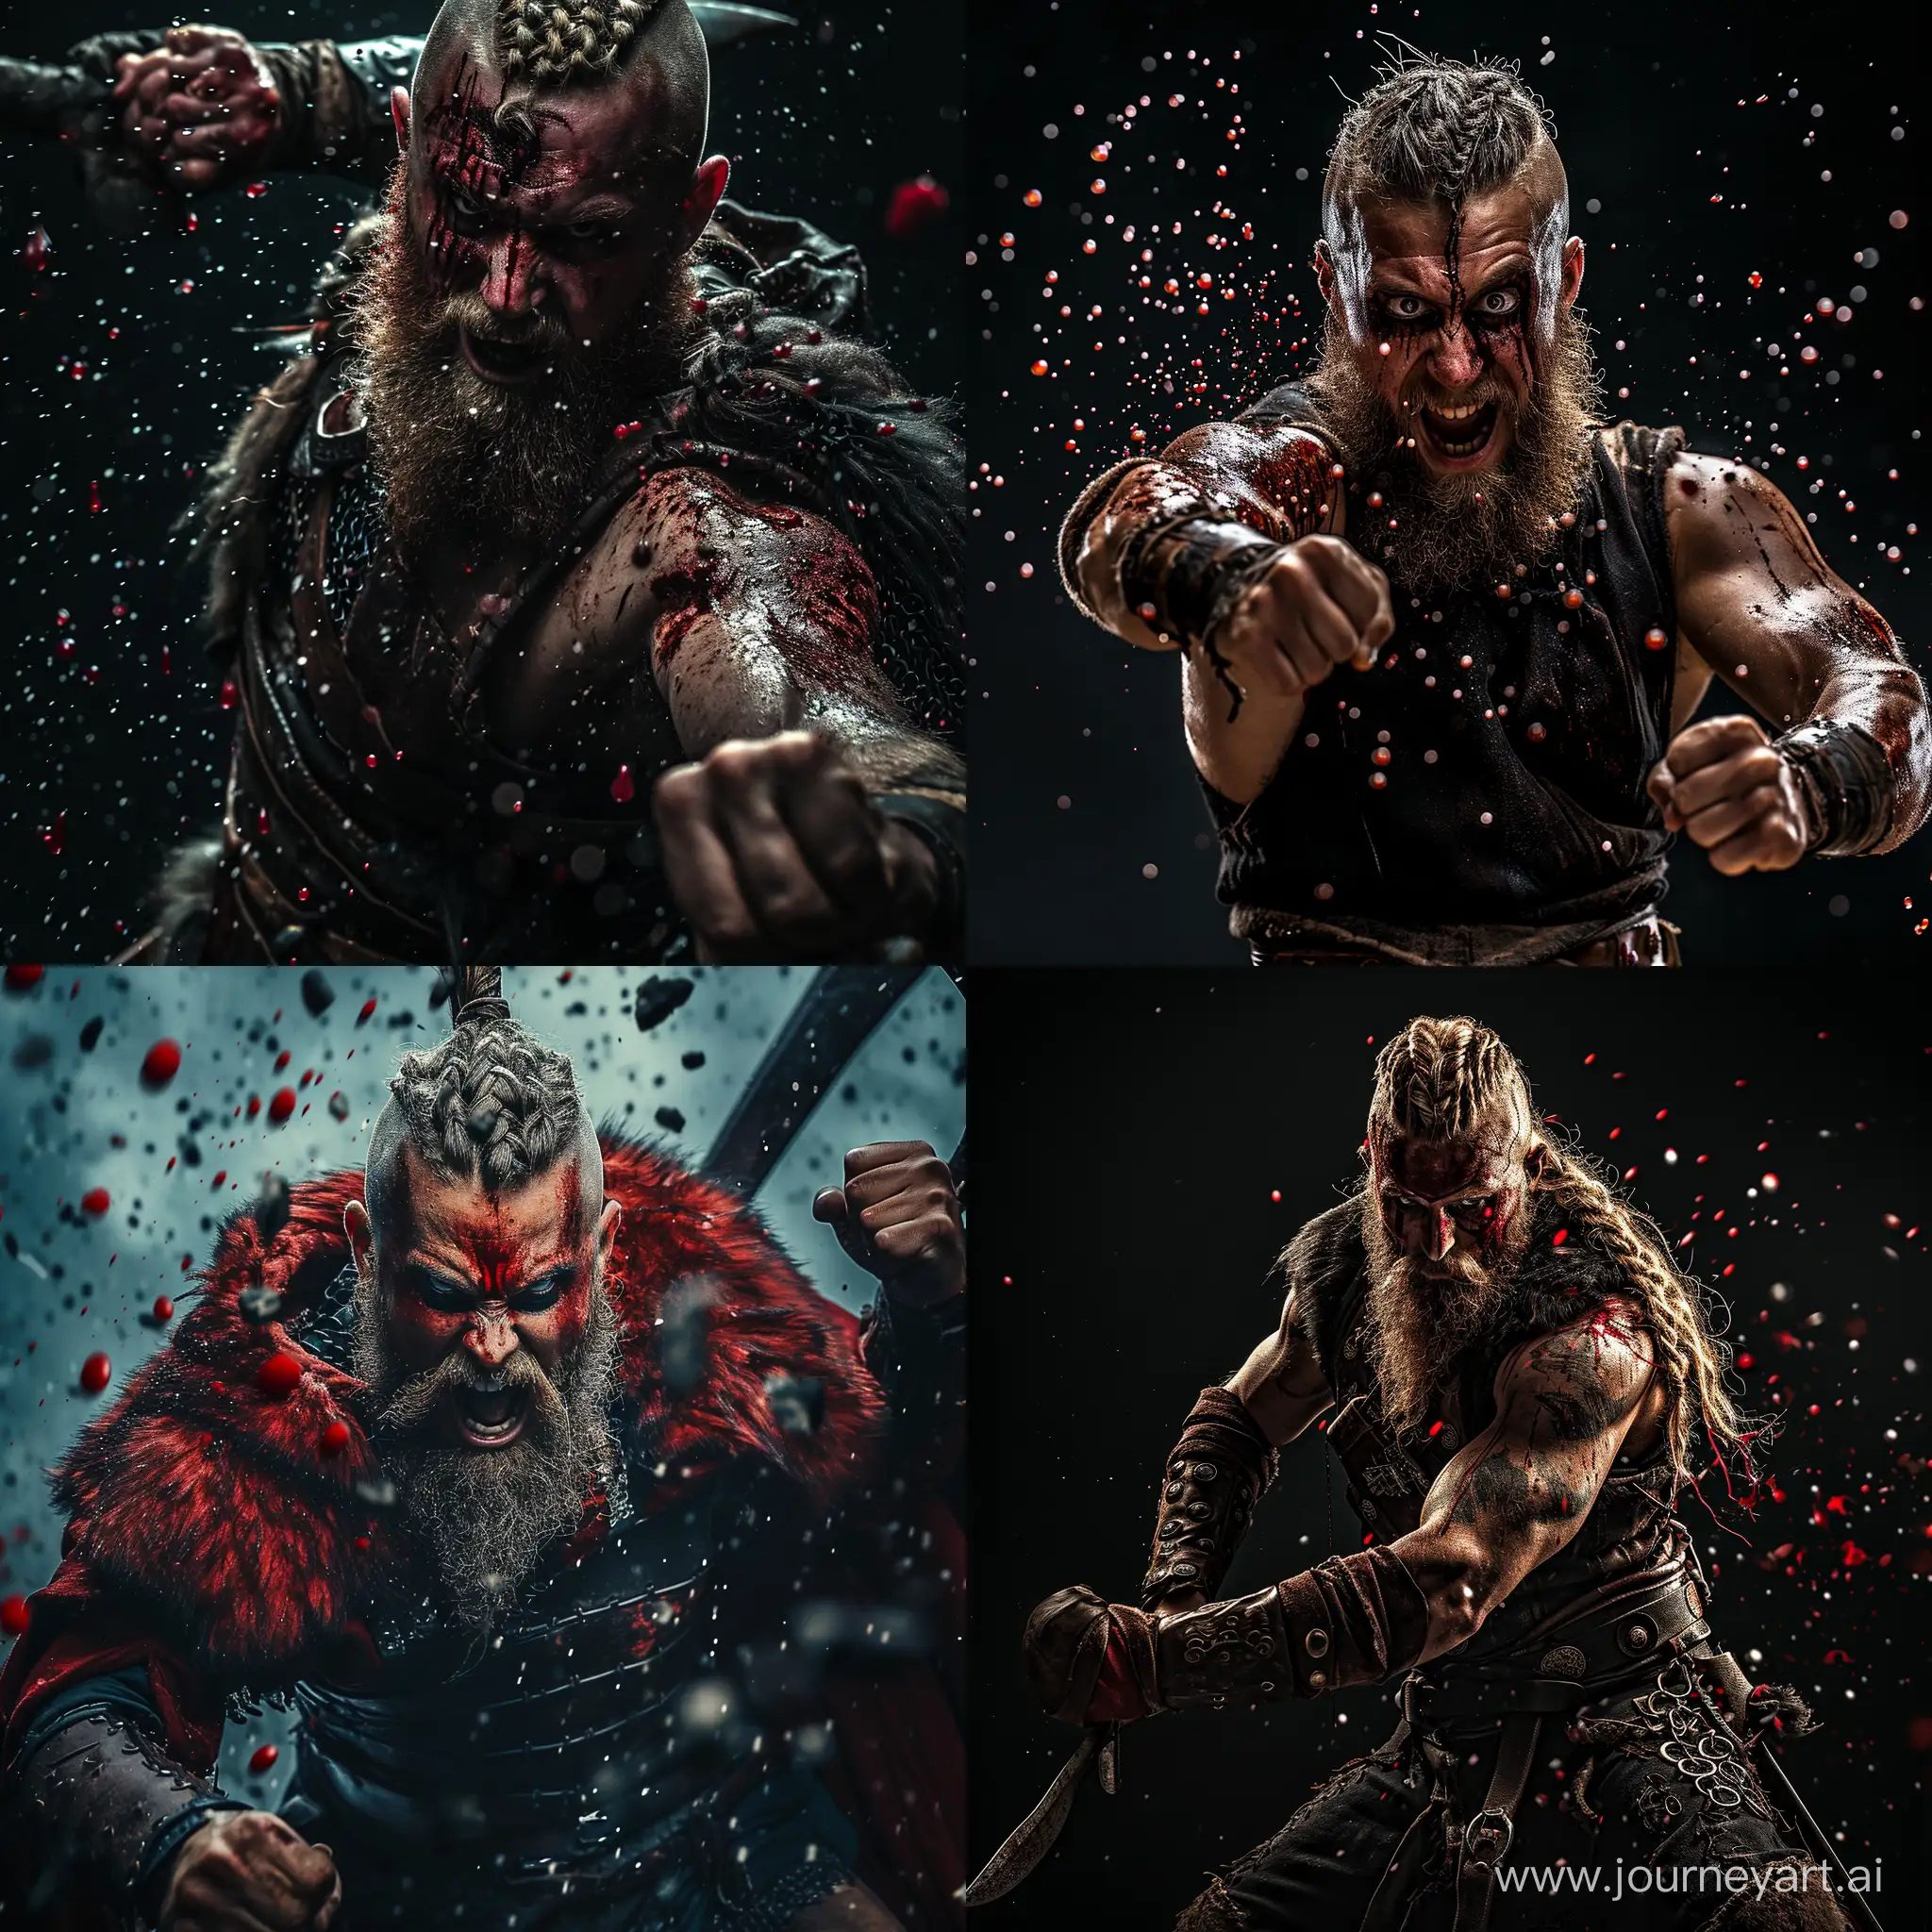 Fierce-Viking-Battle-Epic-Pose-and-Scattered-Drops-of-Blood